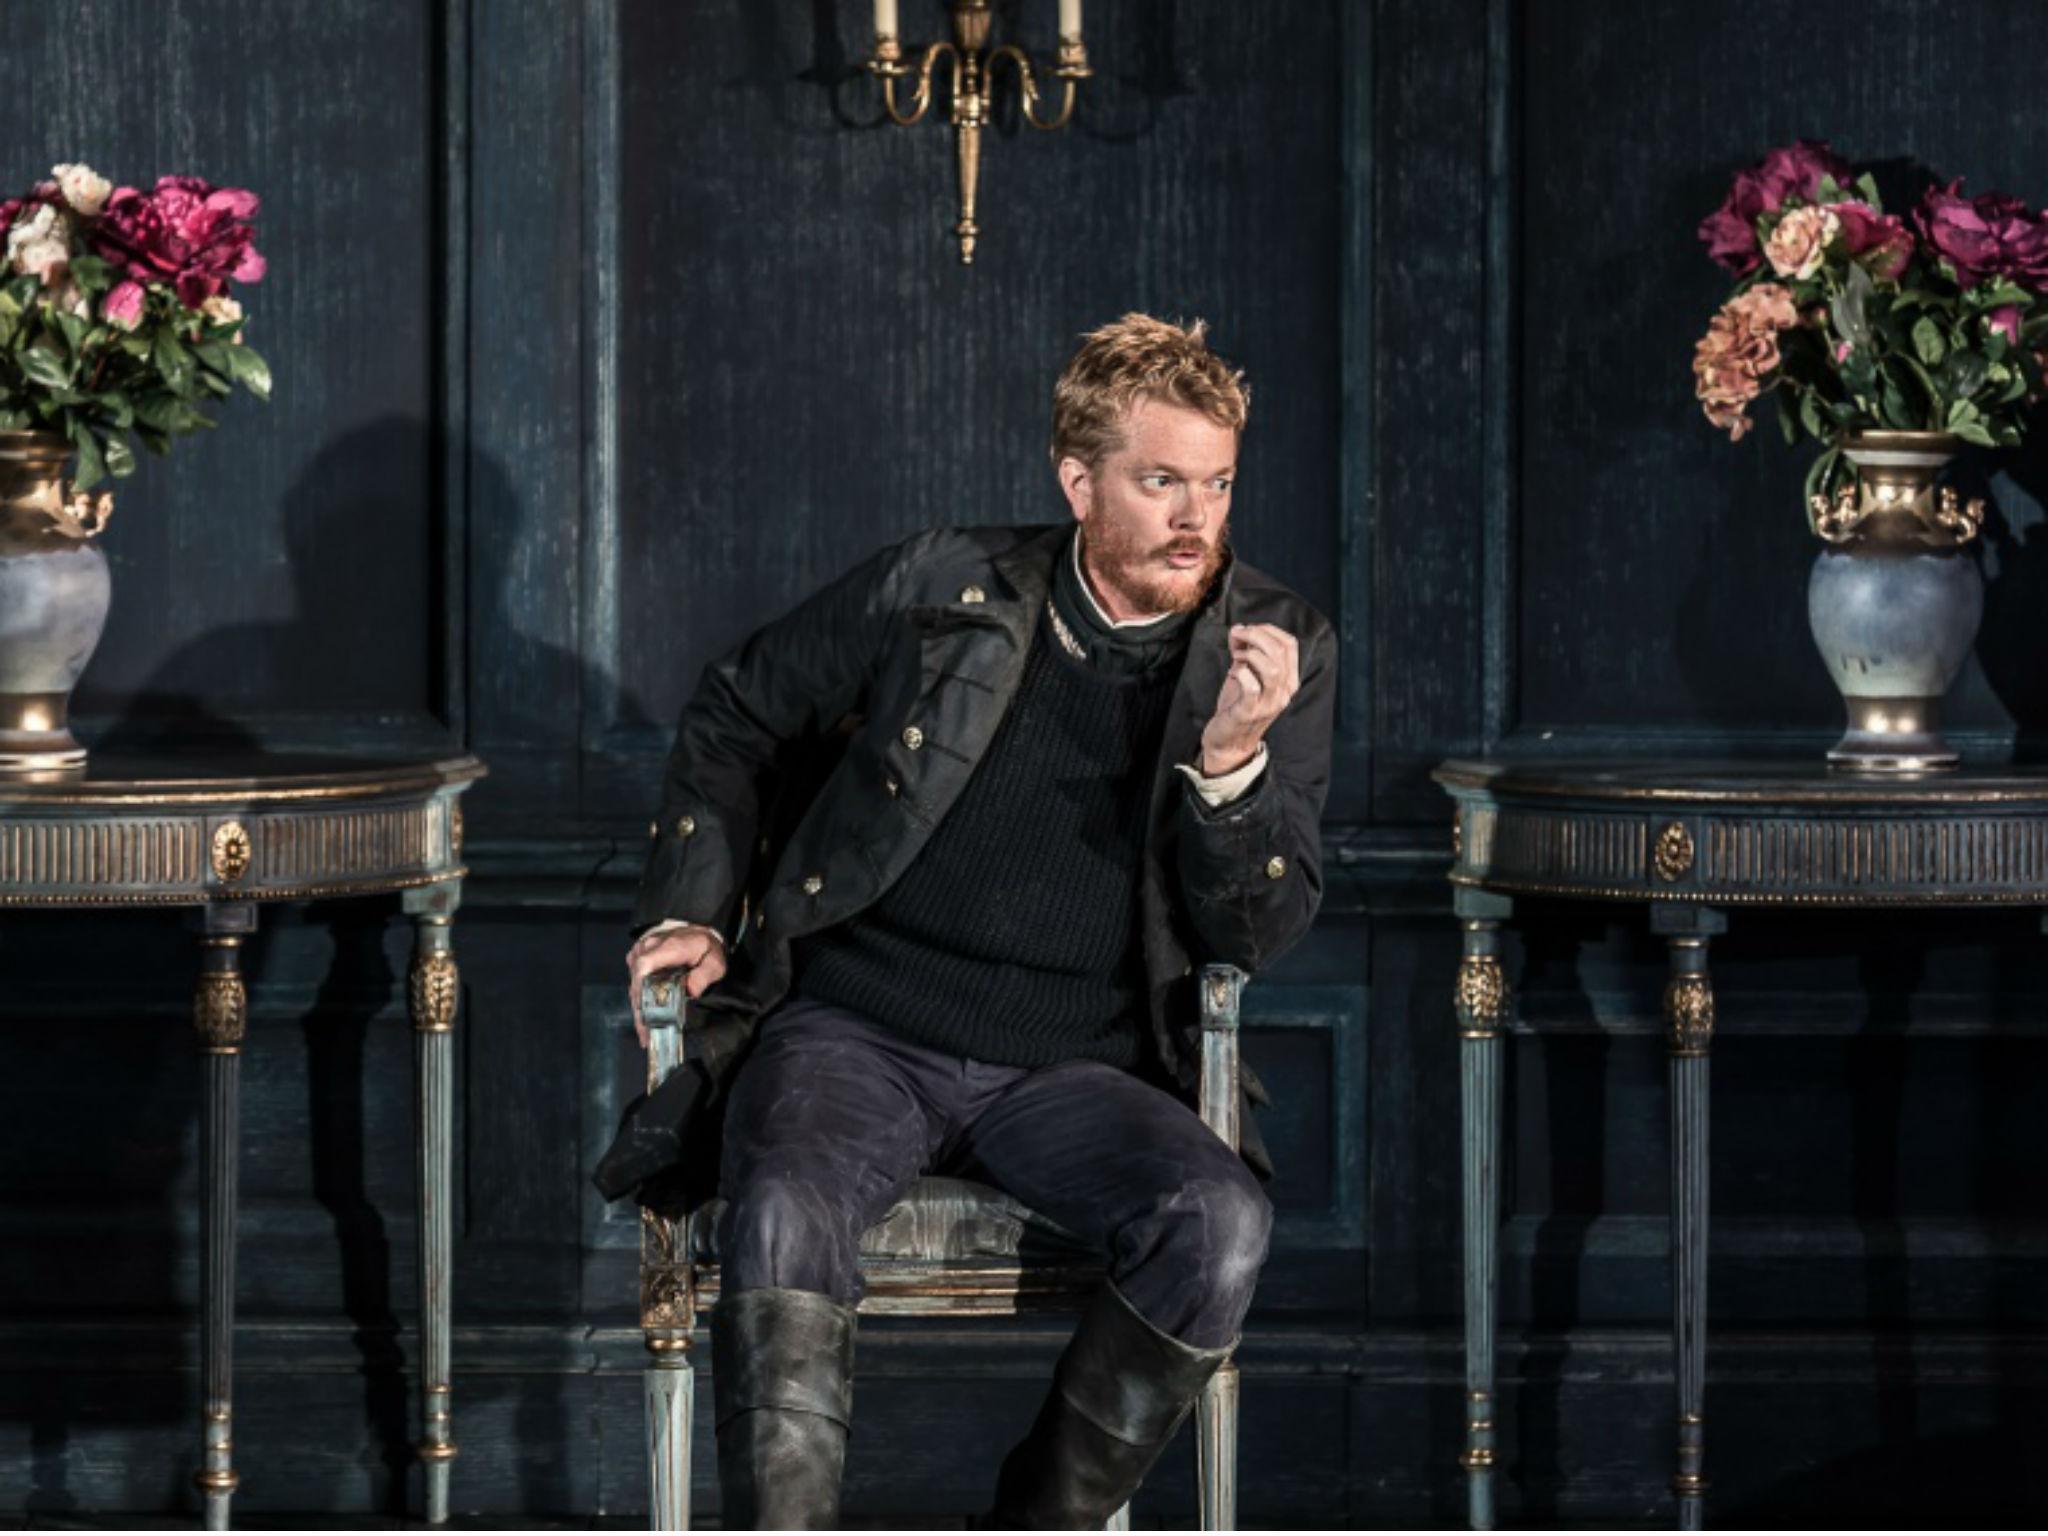 Toby Spence is in fine voice in the title role of Idomeneo at Garsington Opera